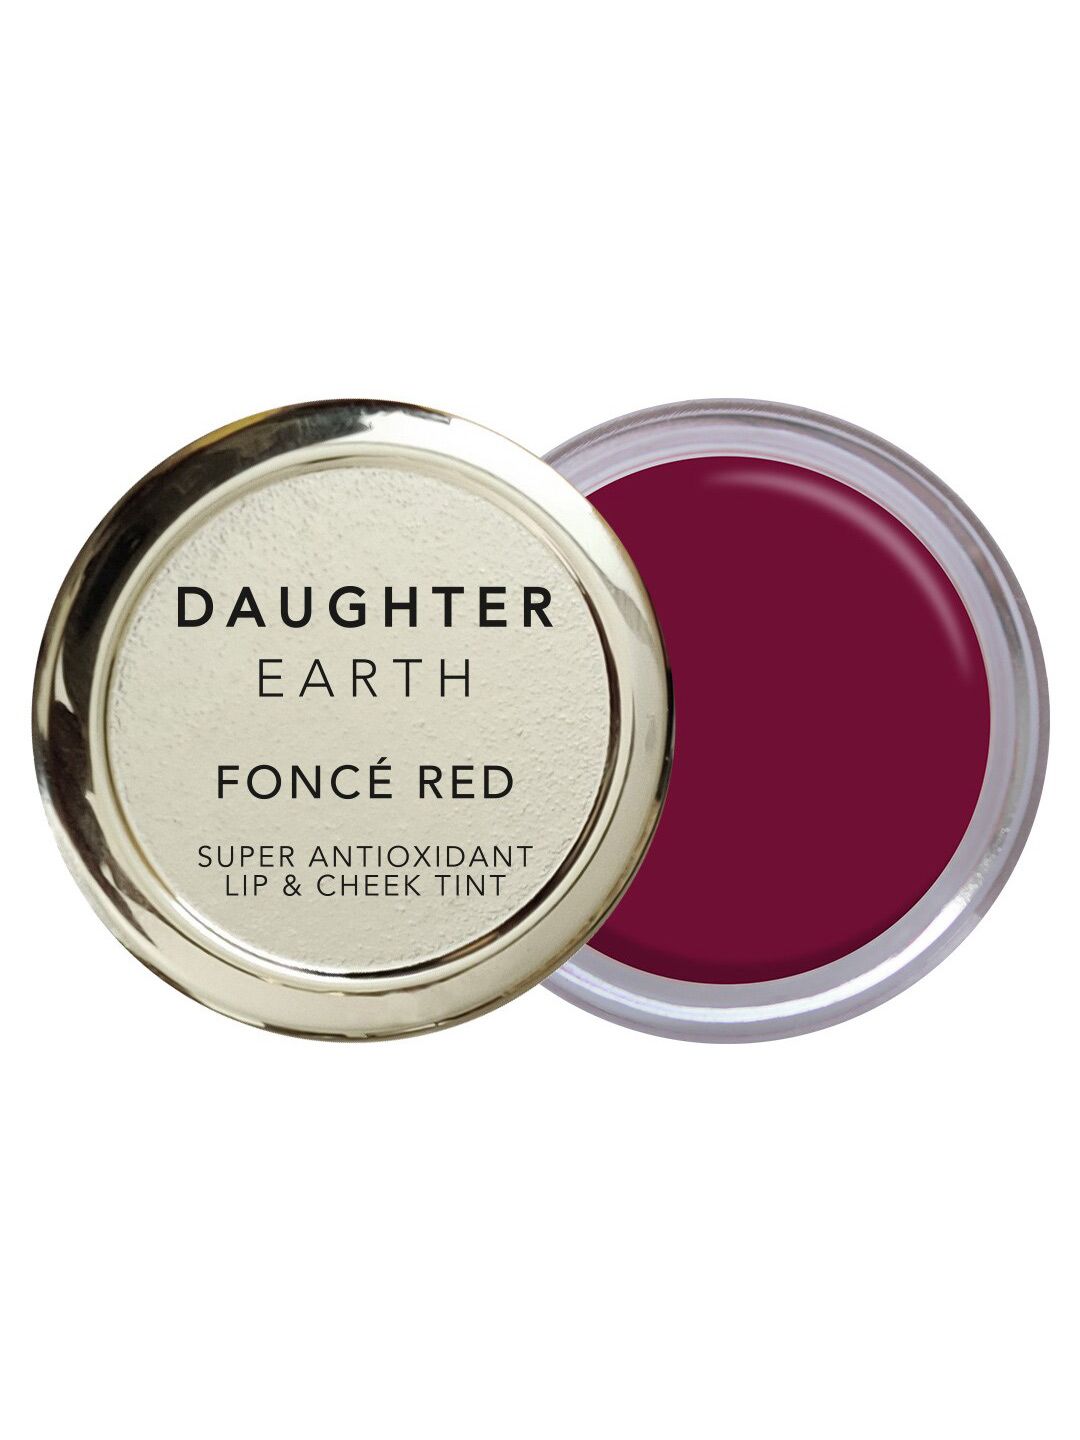 DAUGHTER EARTH Super Antioxidant Lip & Cheek Tint Fonce Red - 4.5 g Price in India